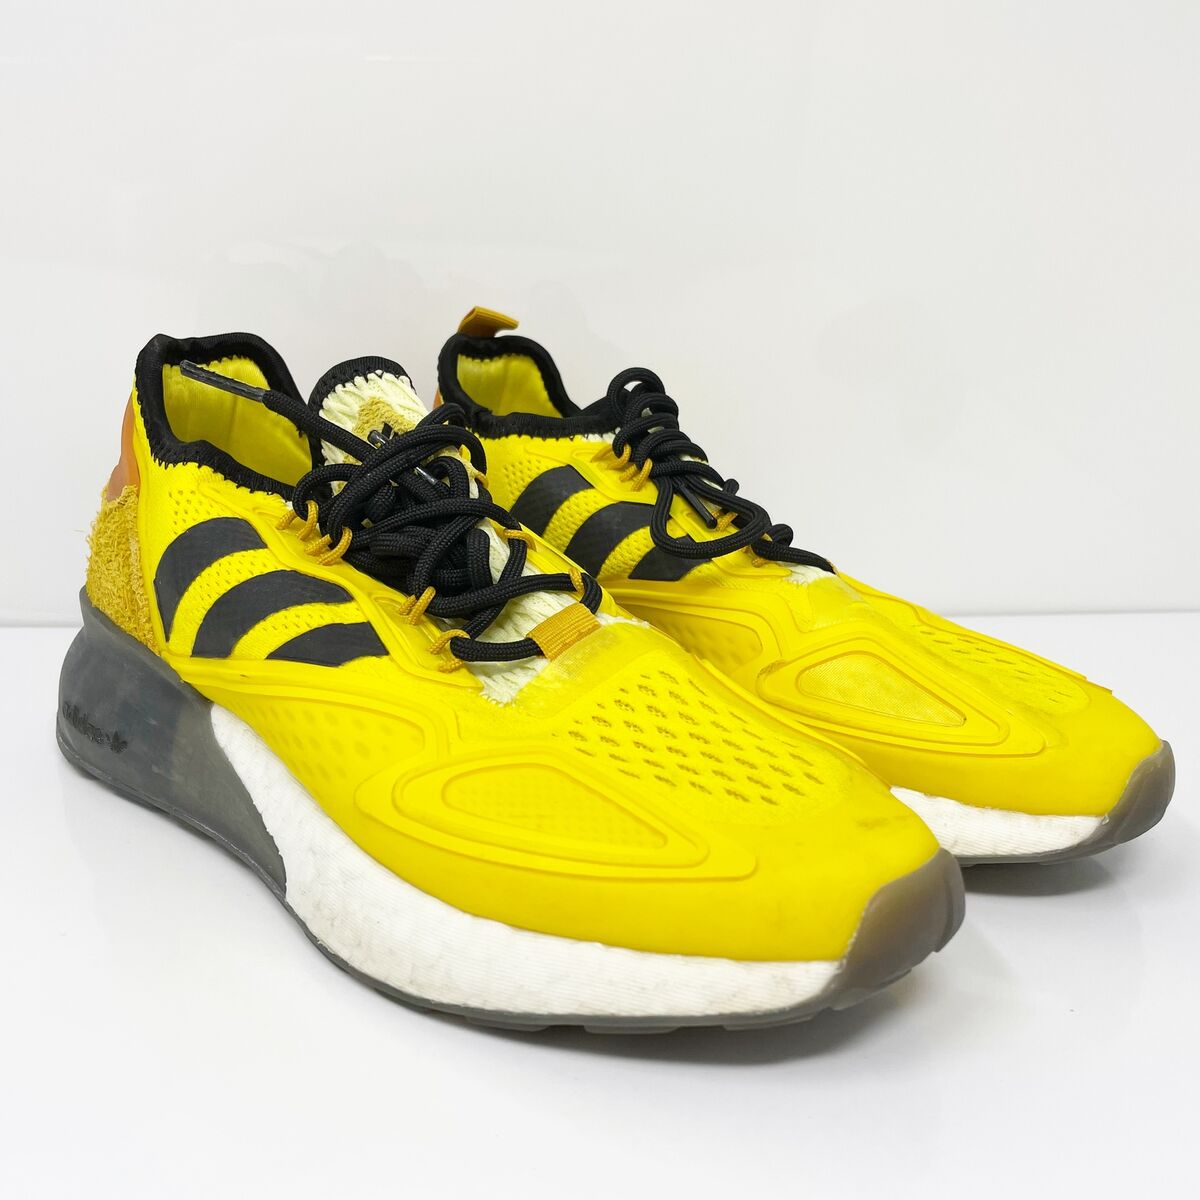 Adidas Mens Ninja ZX 2K Boost FZ1887 Yellow Running Shoes Sneakers Size 5